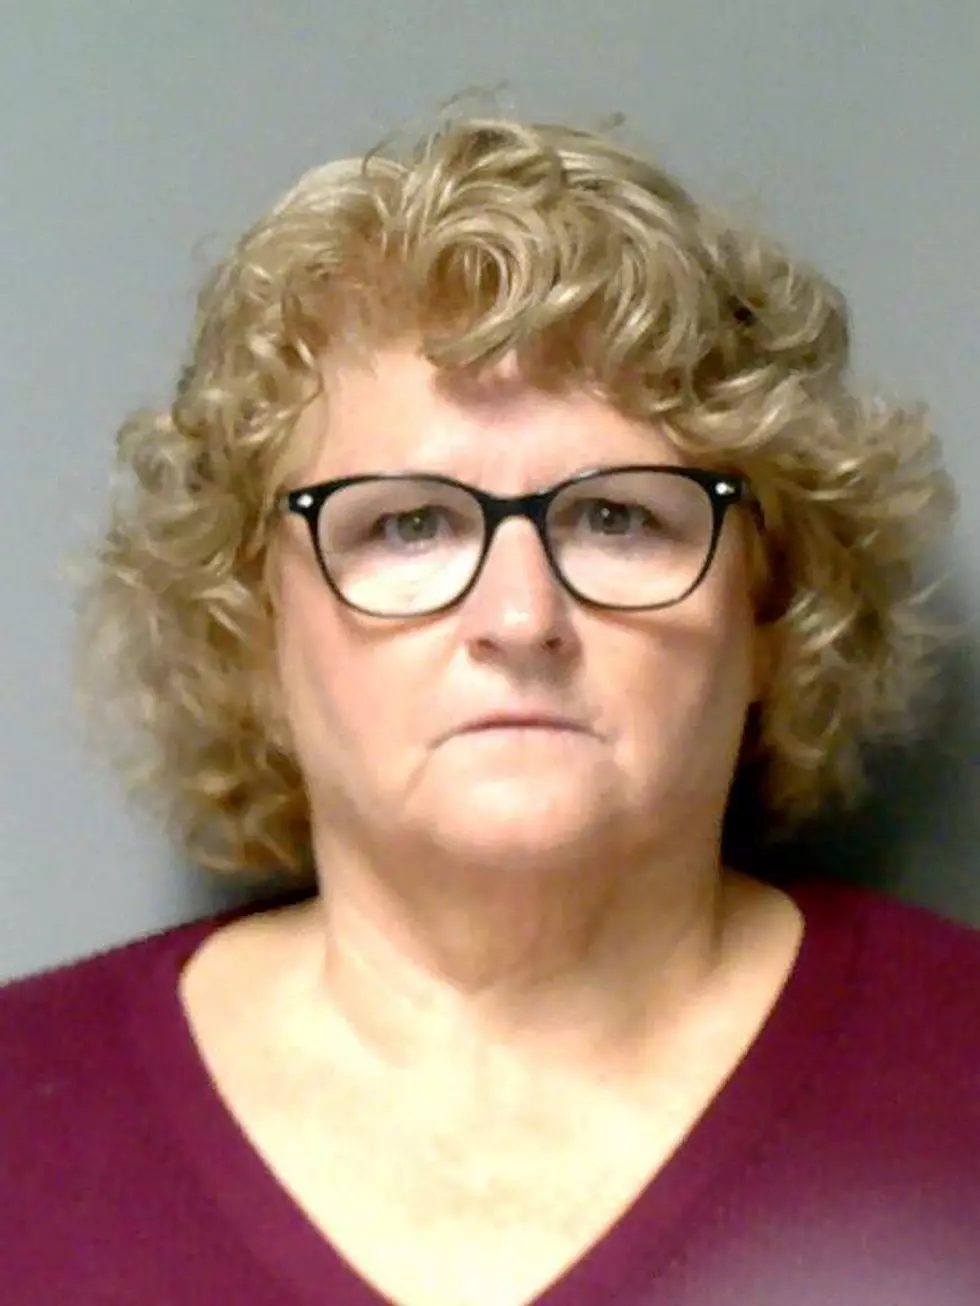 Former MSU Gymnastics Coach Kathie Klages Convicted Of Lying To Police